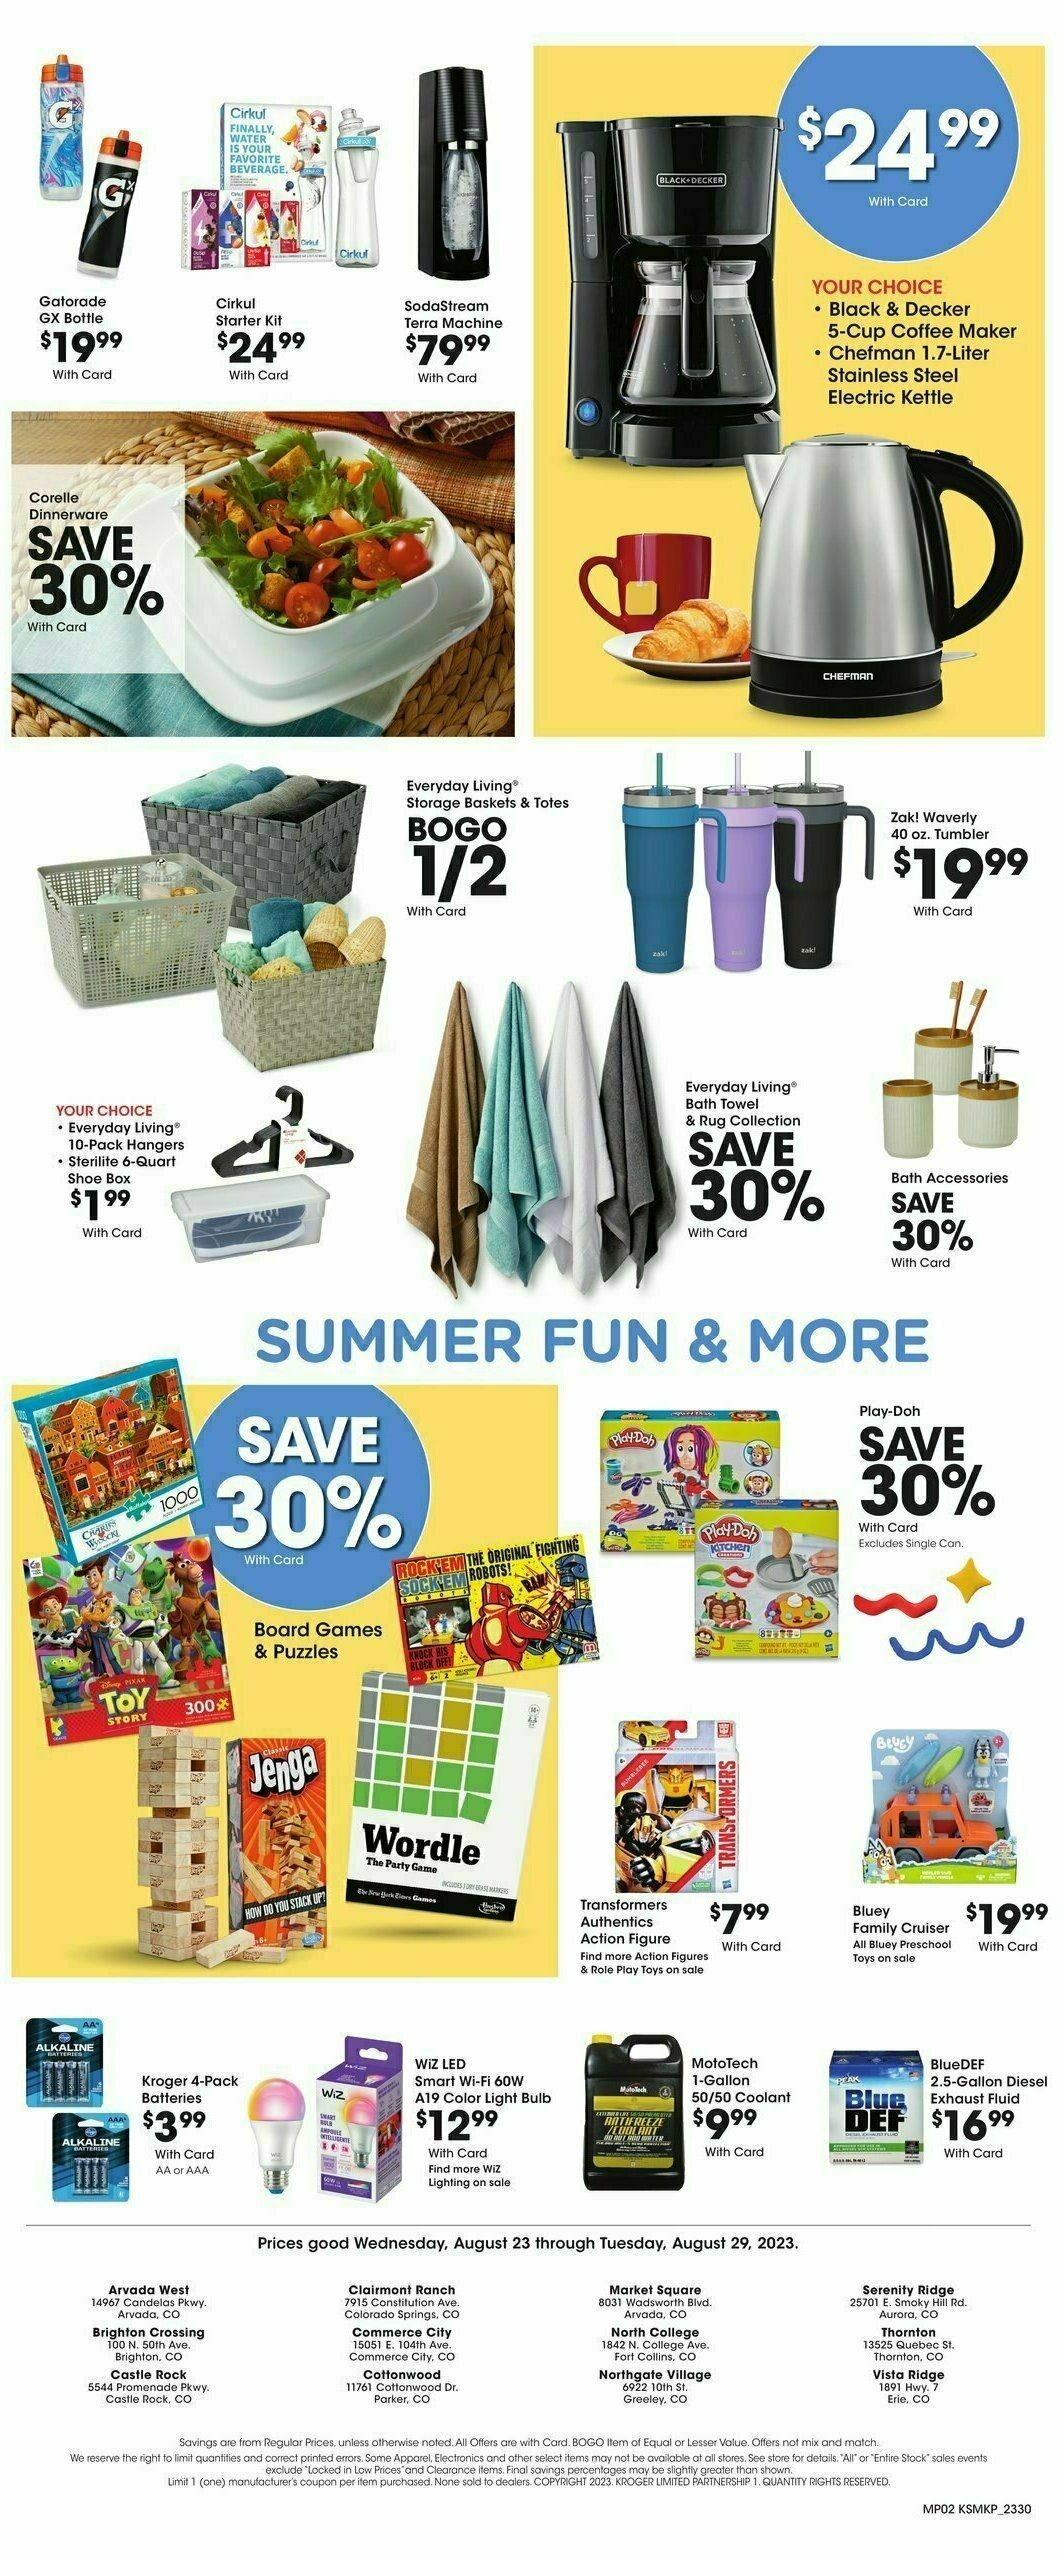 King Soopers Weekly Ad from August 23